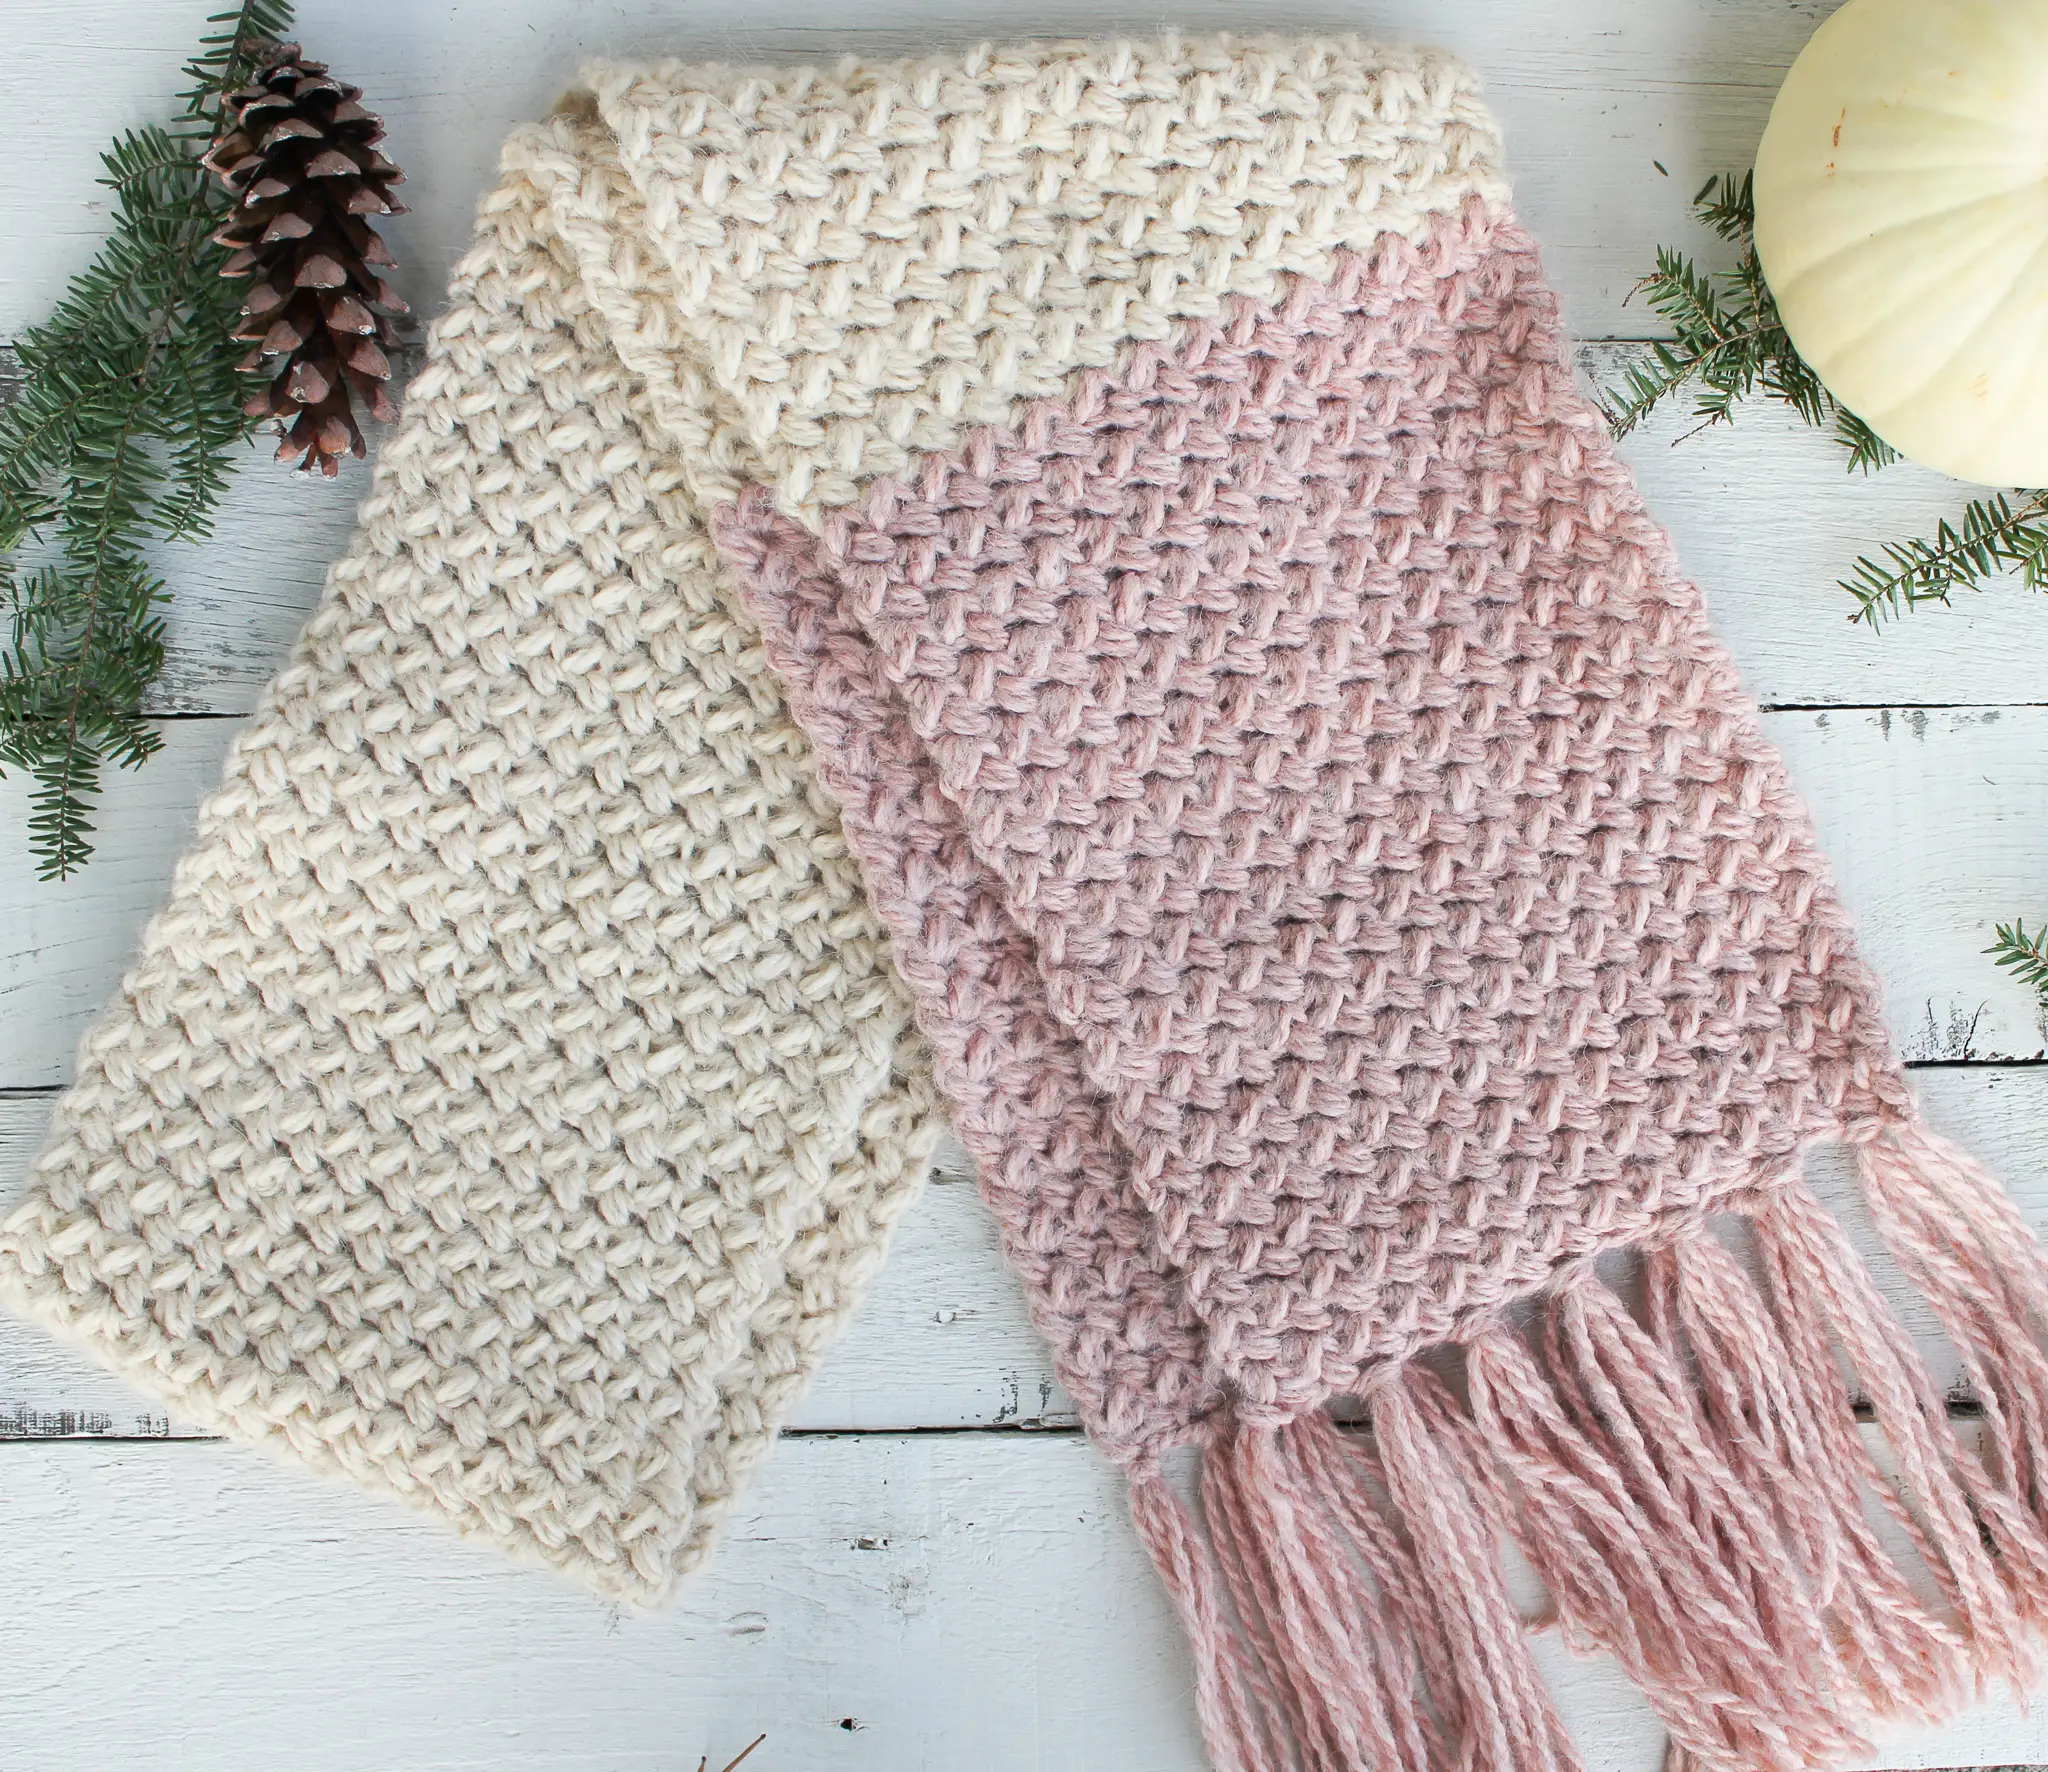 8 Crochet Stitches for Making Warm Scarves - Easy Crochet Patterns